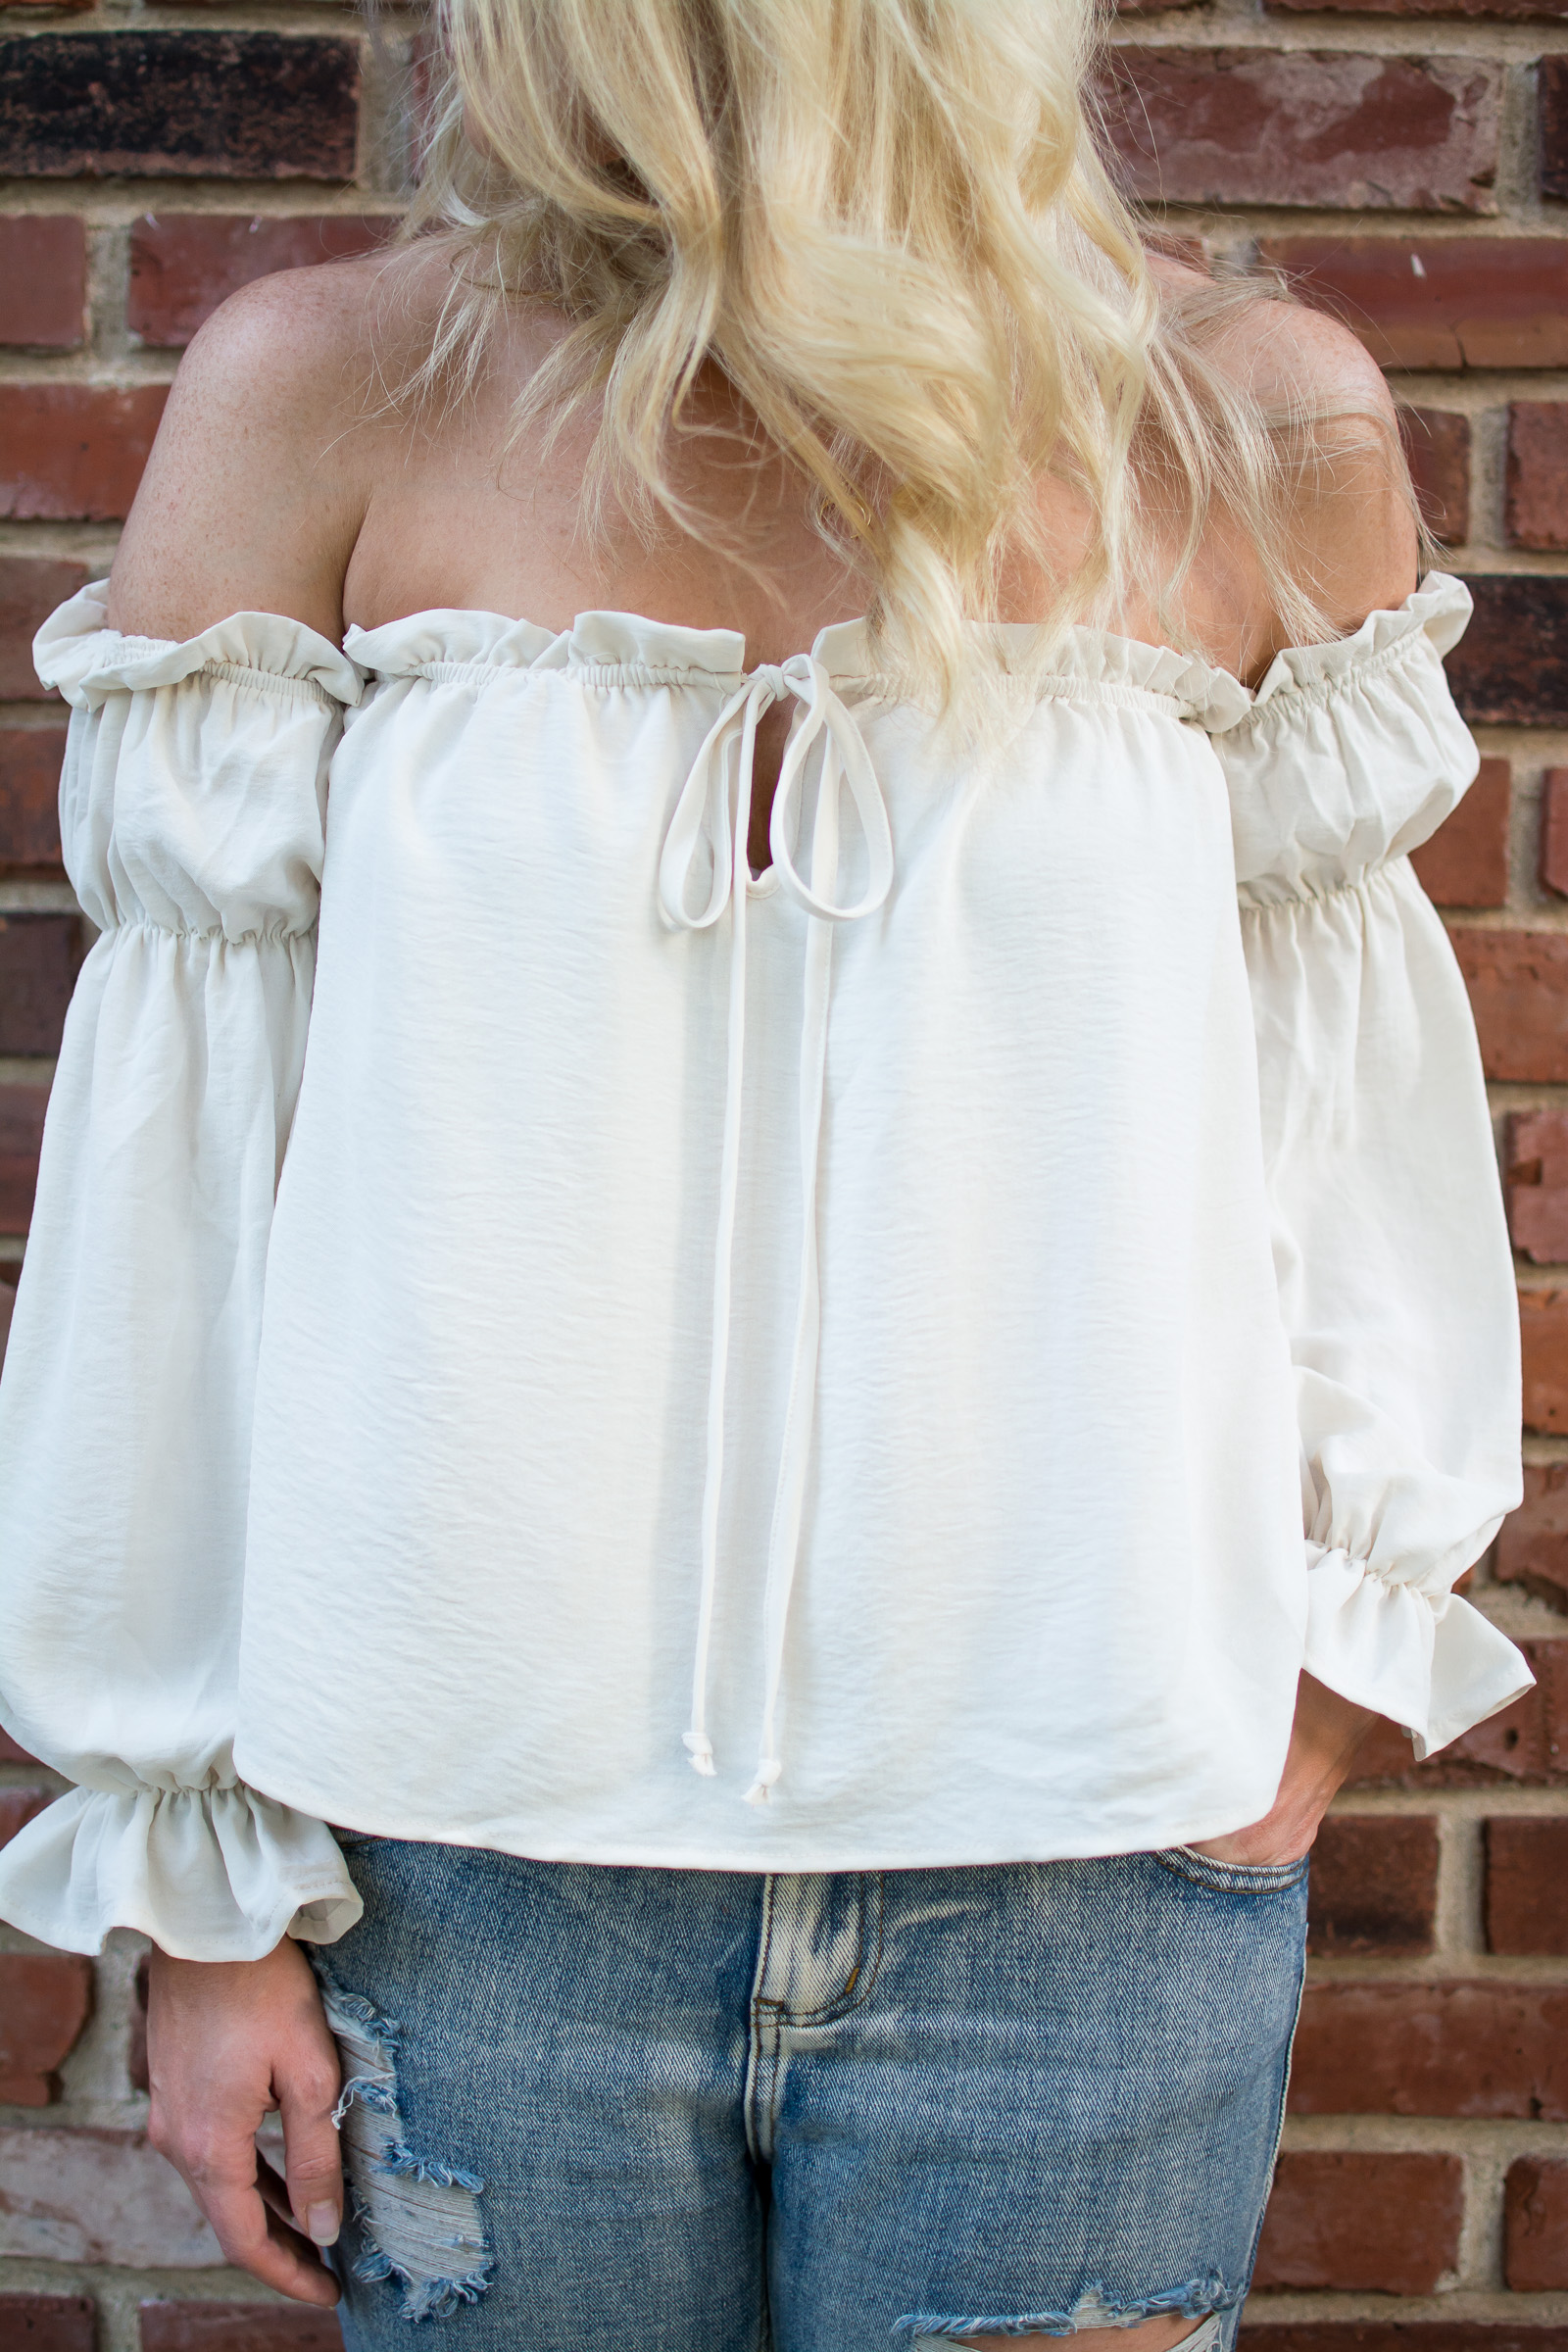 Girly and Tough: Flouncy Blouse with One Teaspoon Boyfriend Jeans. | Ashley from LSR